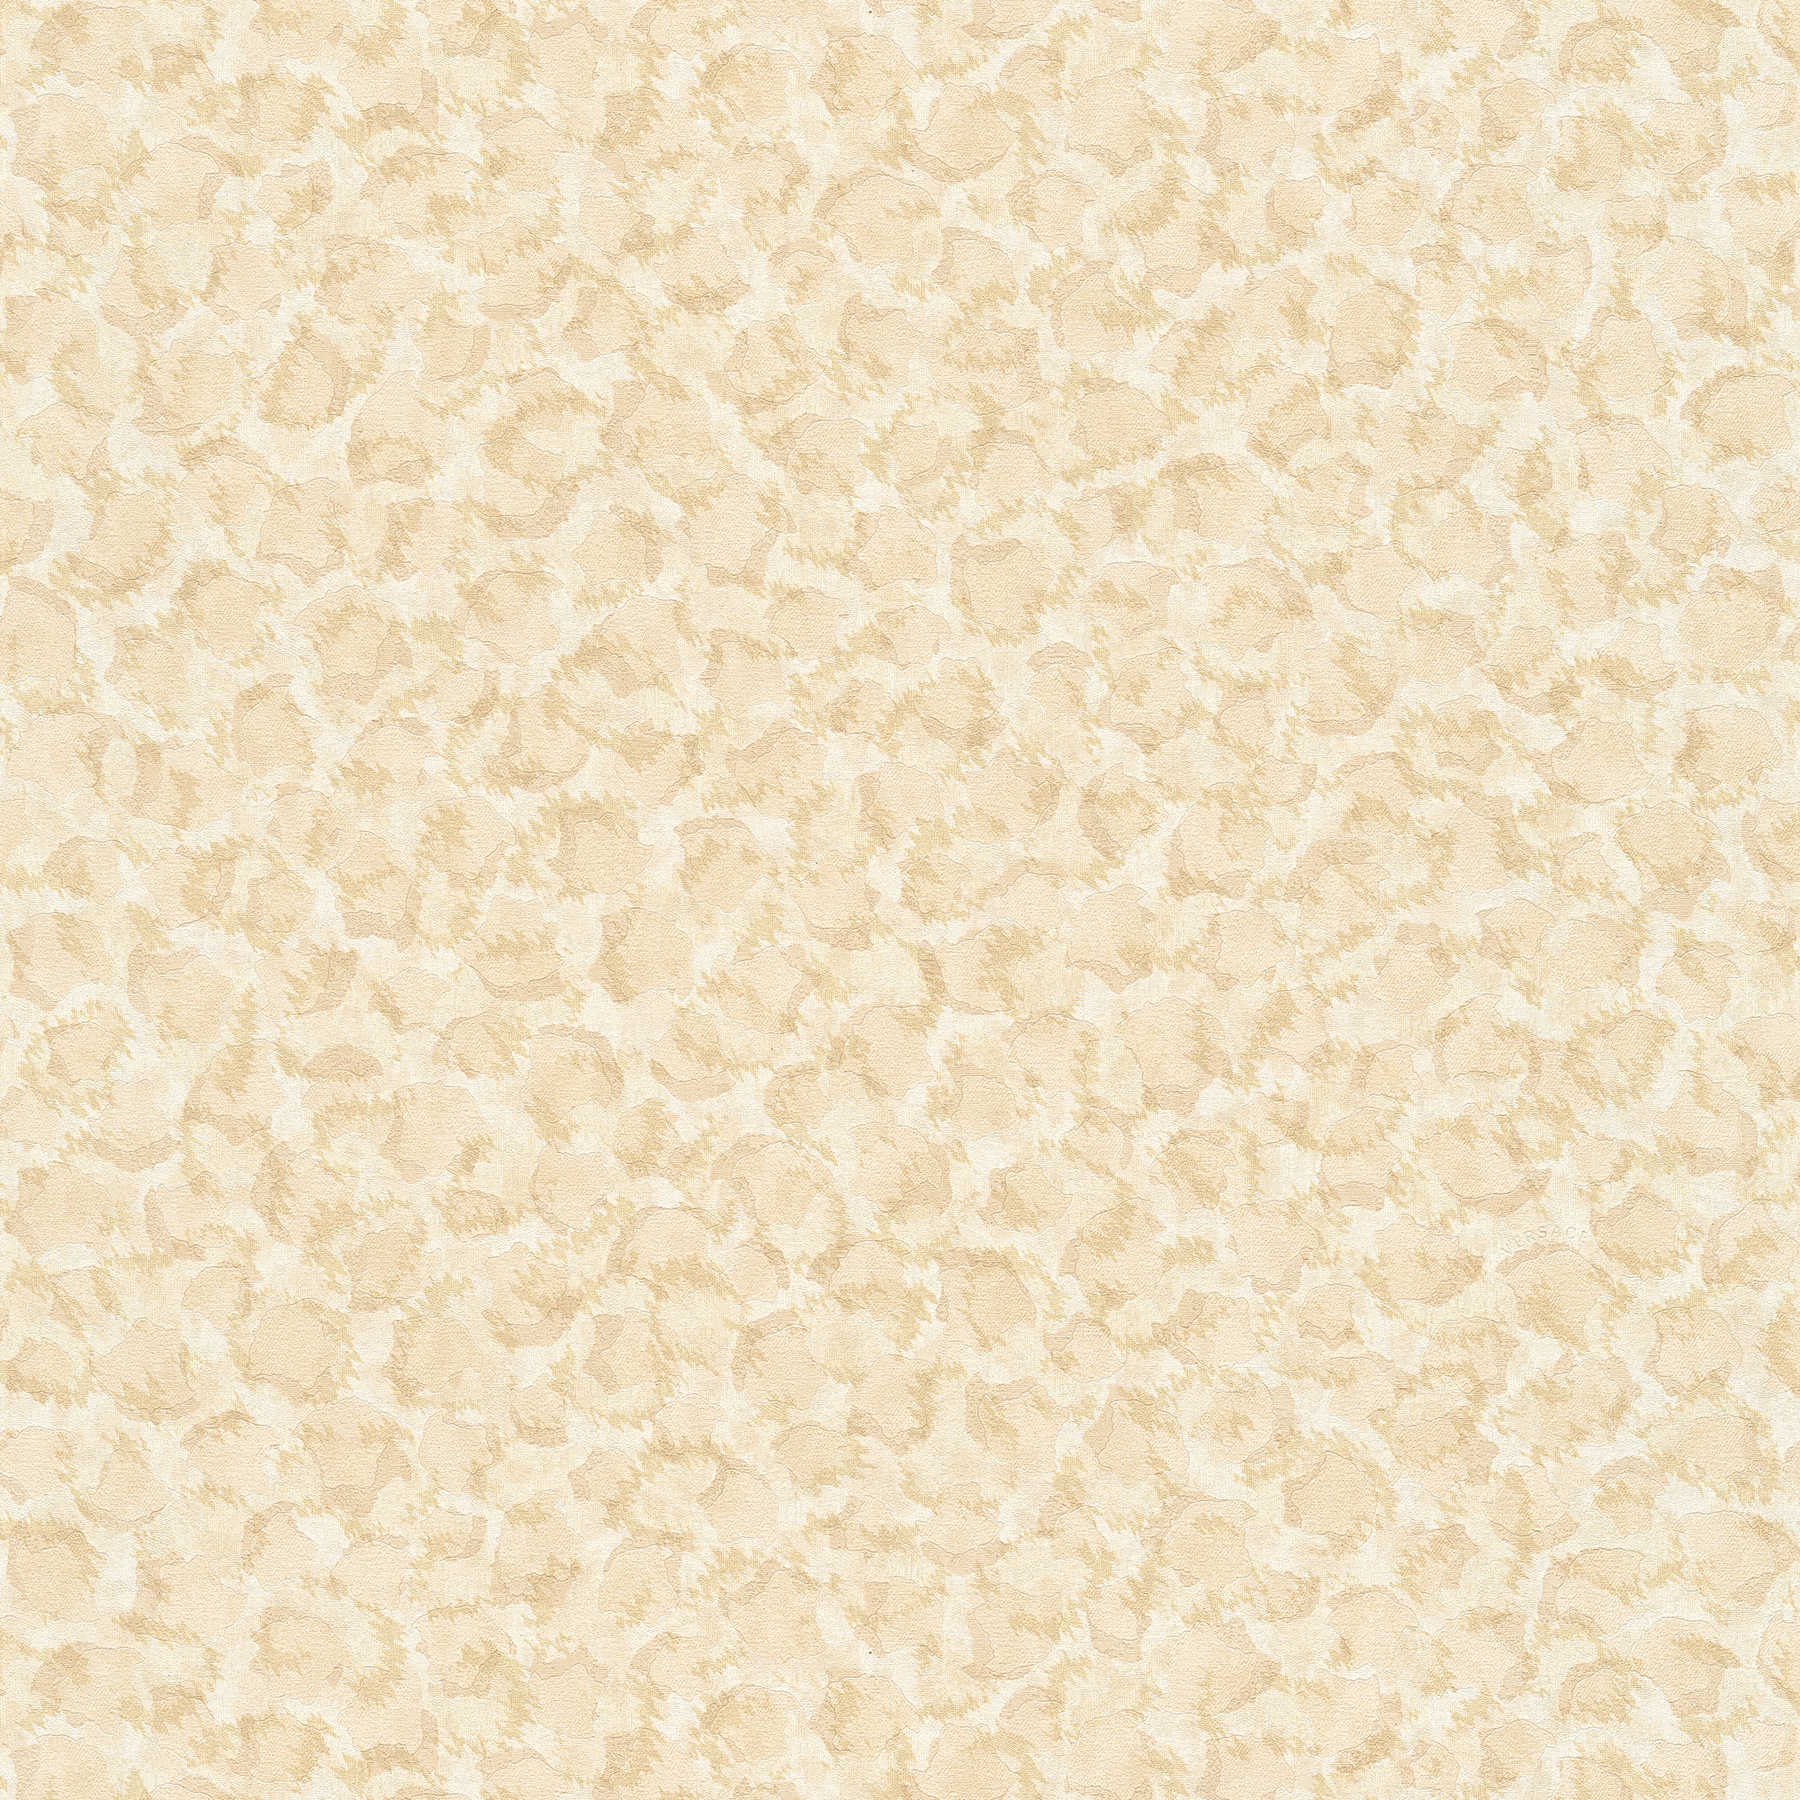 Polka dots wallpaper with spots design in ethnic style - beige
